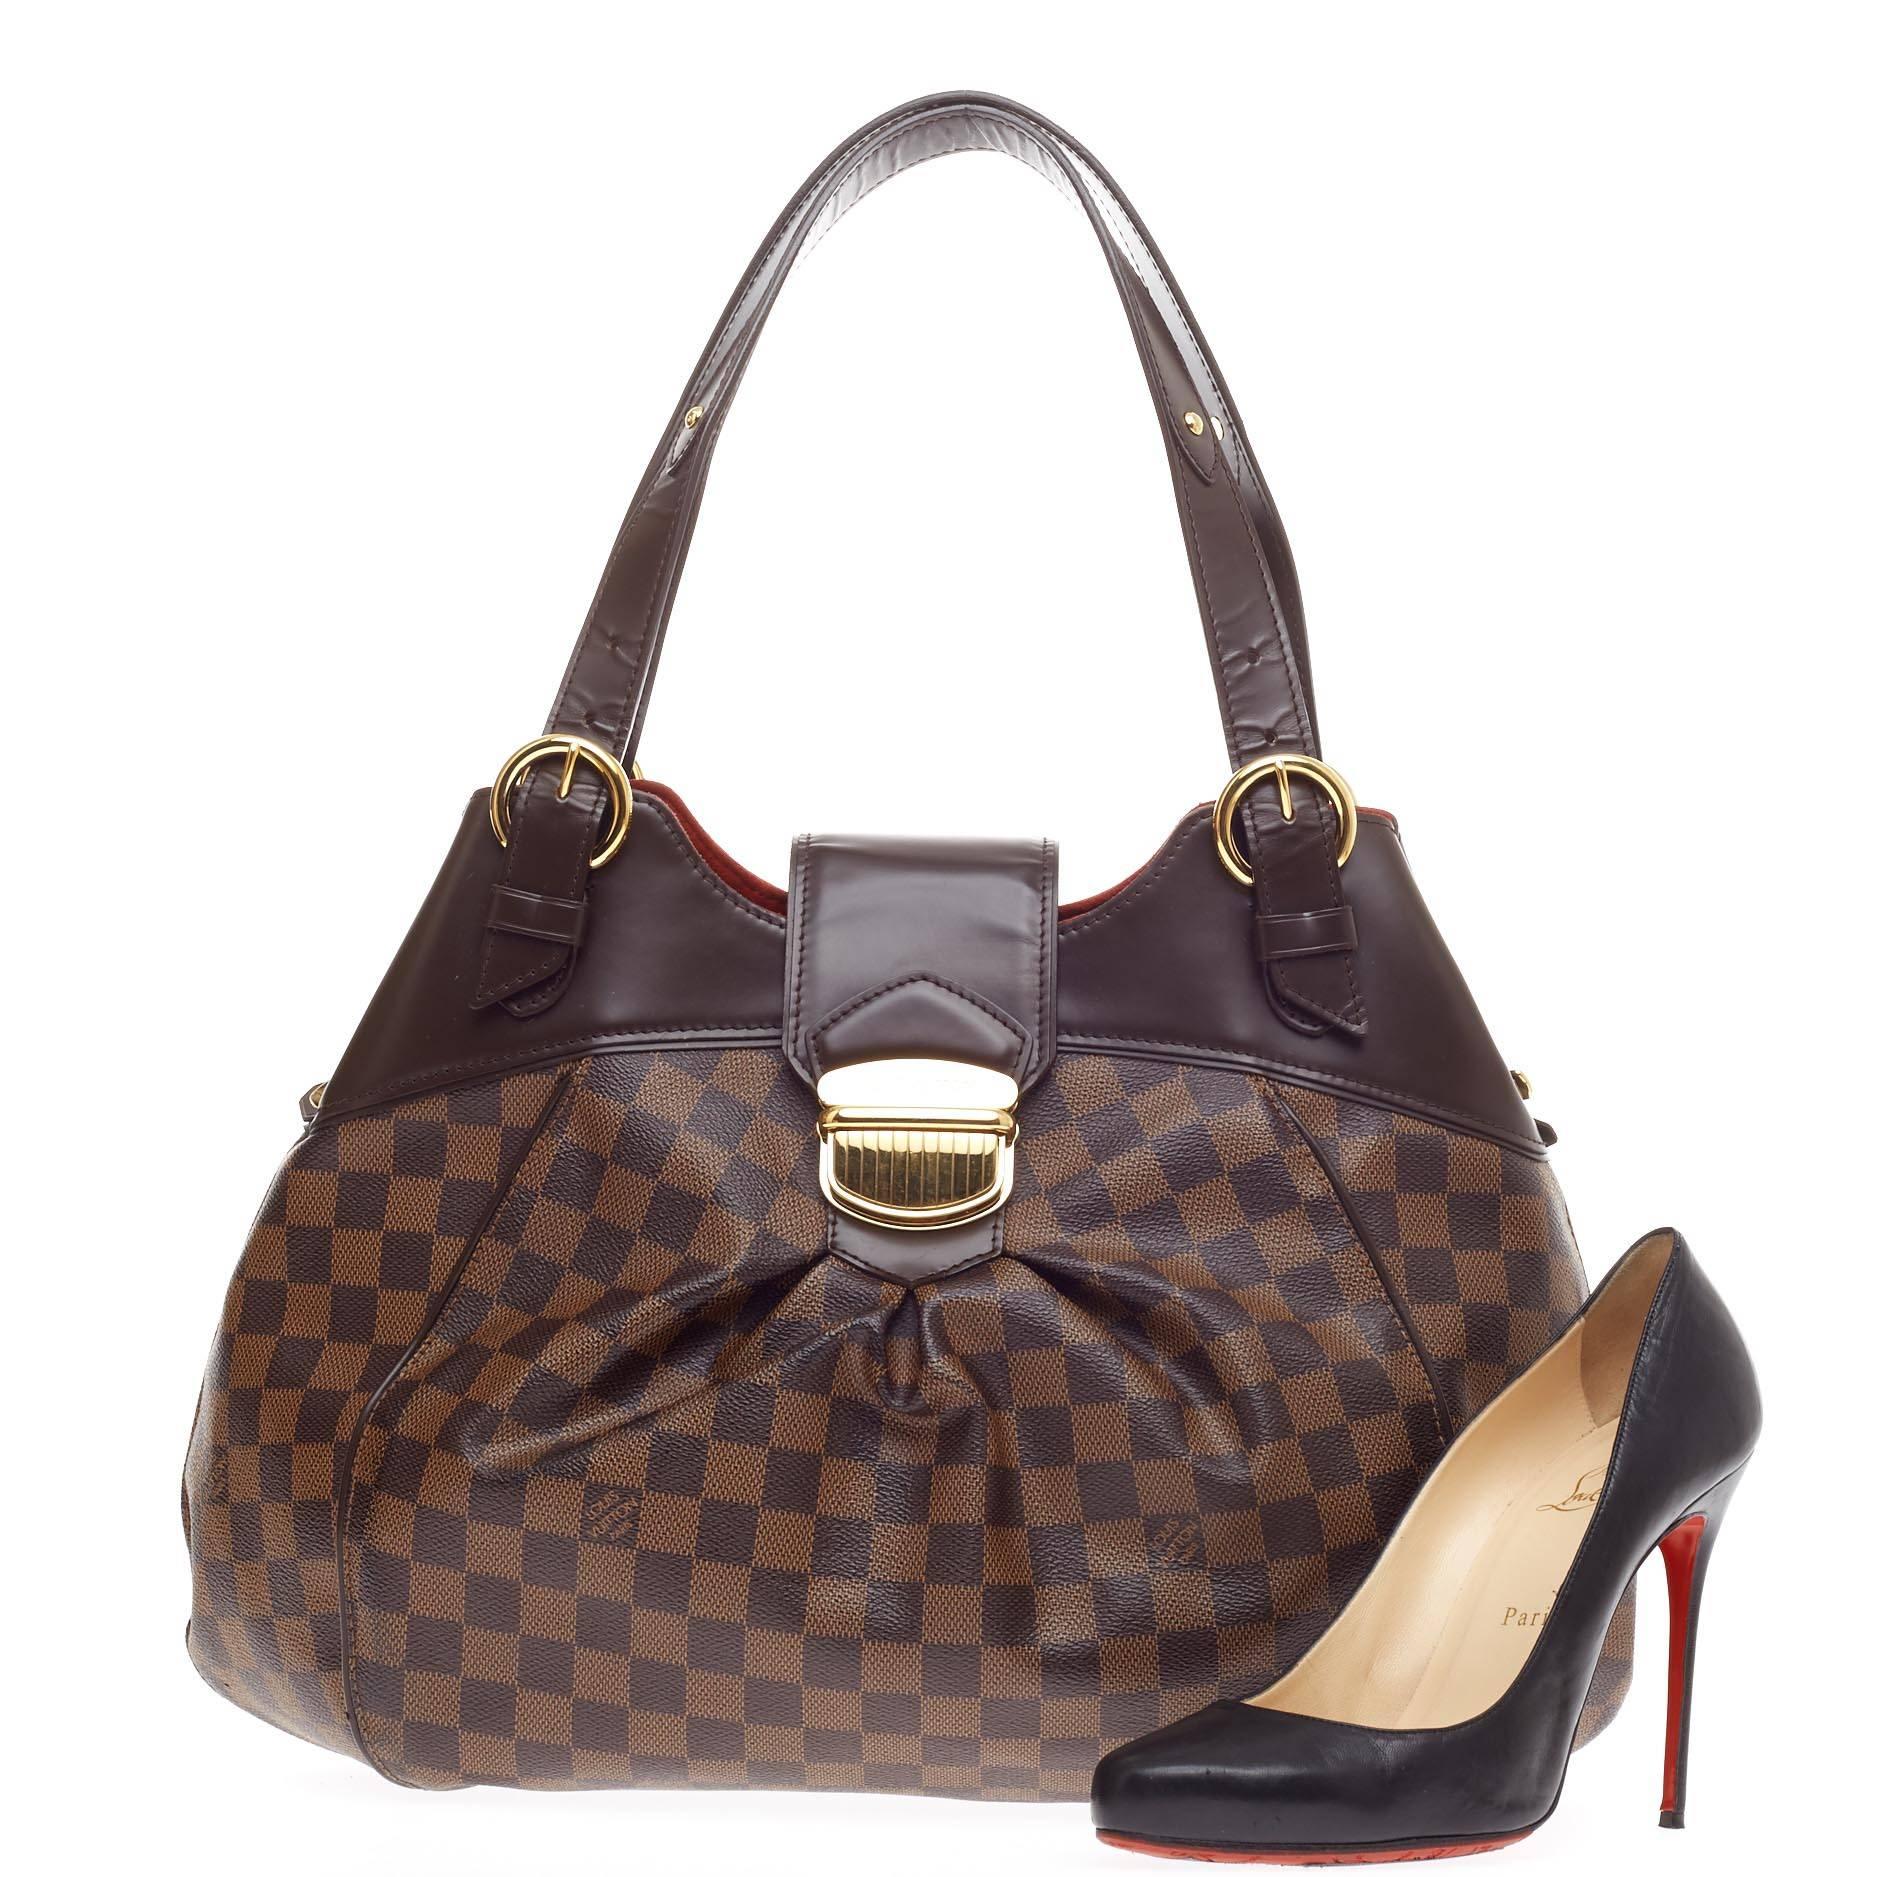 This authentic Louis Vuitton Sistina Damier GM is perfect for an everyday look for the modern woman. Crafted in the brand's iconic damier ebene canvas, this stylish yet feminine tote features subtle center pleating, smooth brown leather trims,